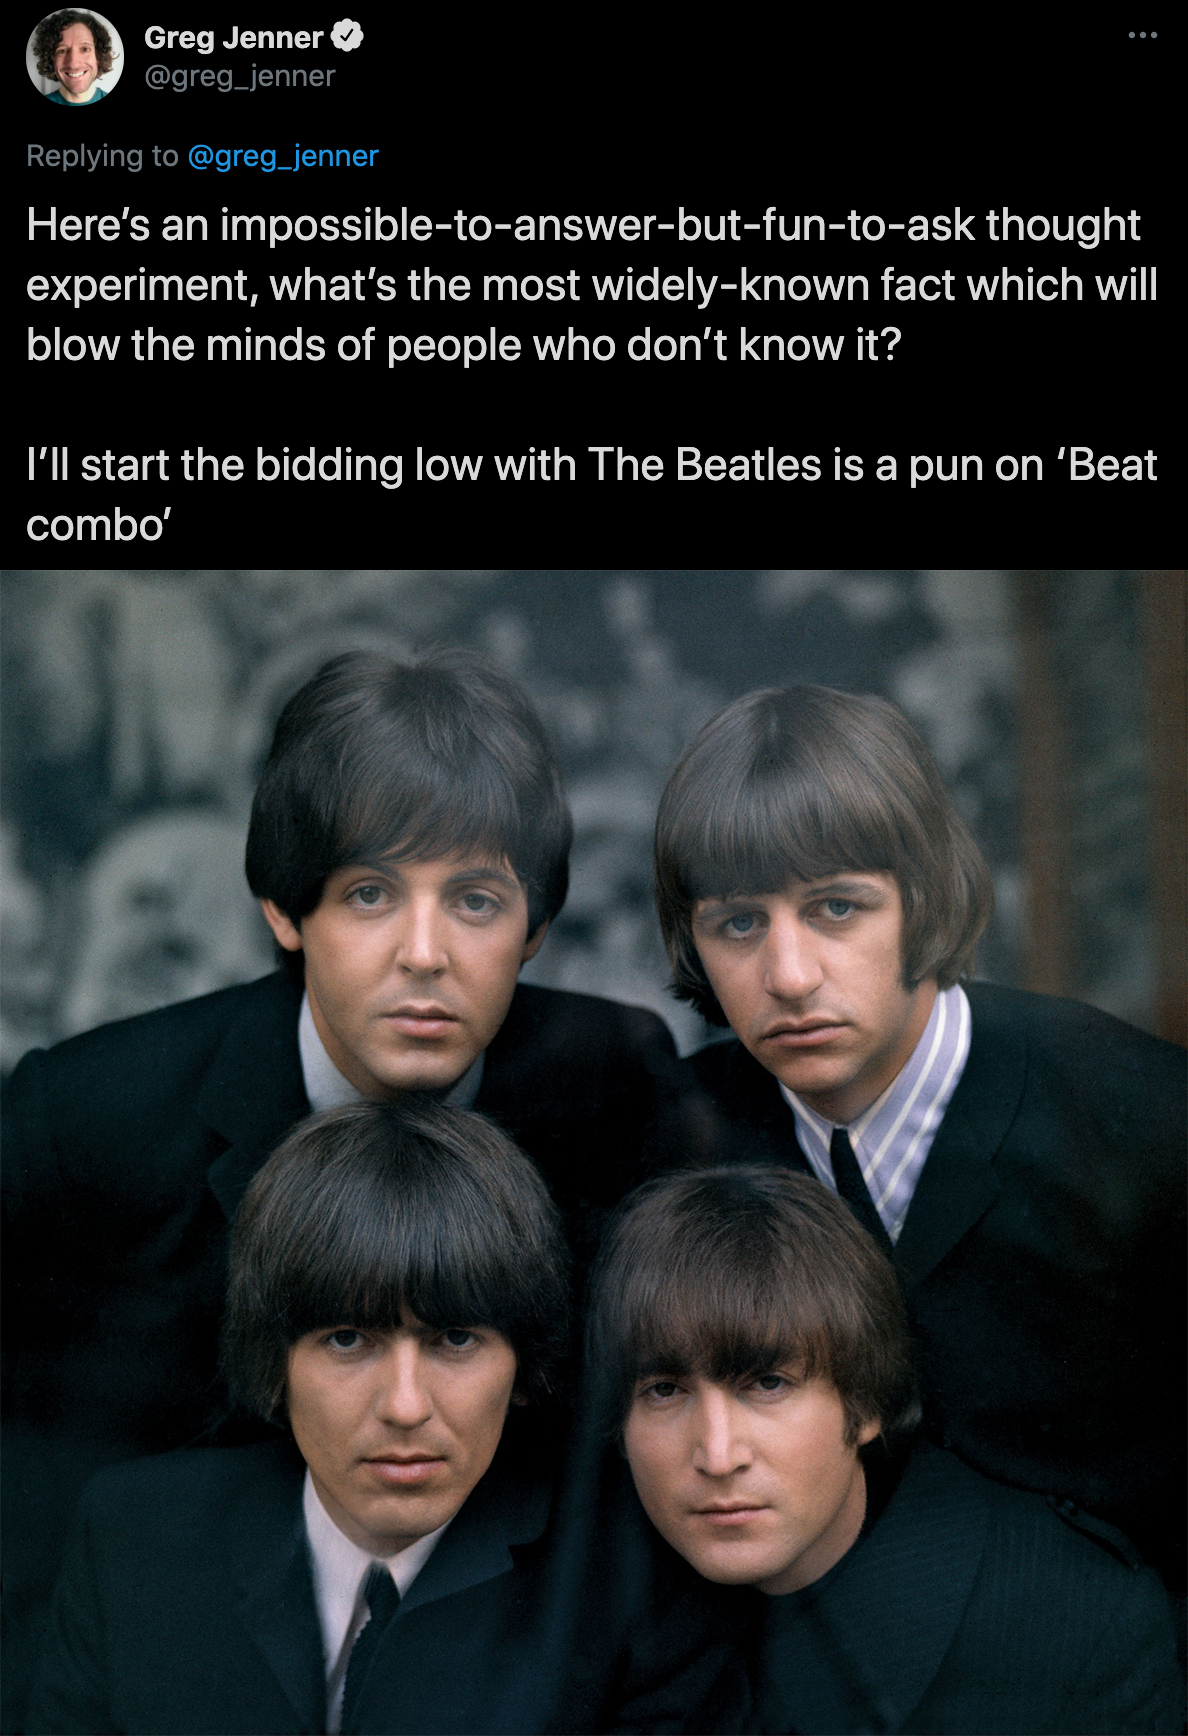 cool facts -- Here's an impossible to answer but fun to ask thought experiment, what's the most widely known fact which will blow the minds of people who don't know it? I'll start the bidding low with The Beatles is a pun on 'Beat combo